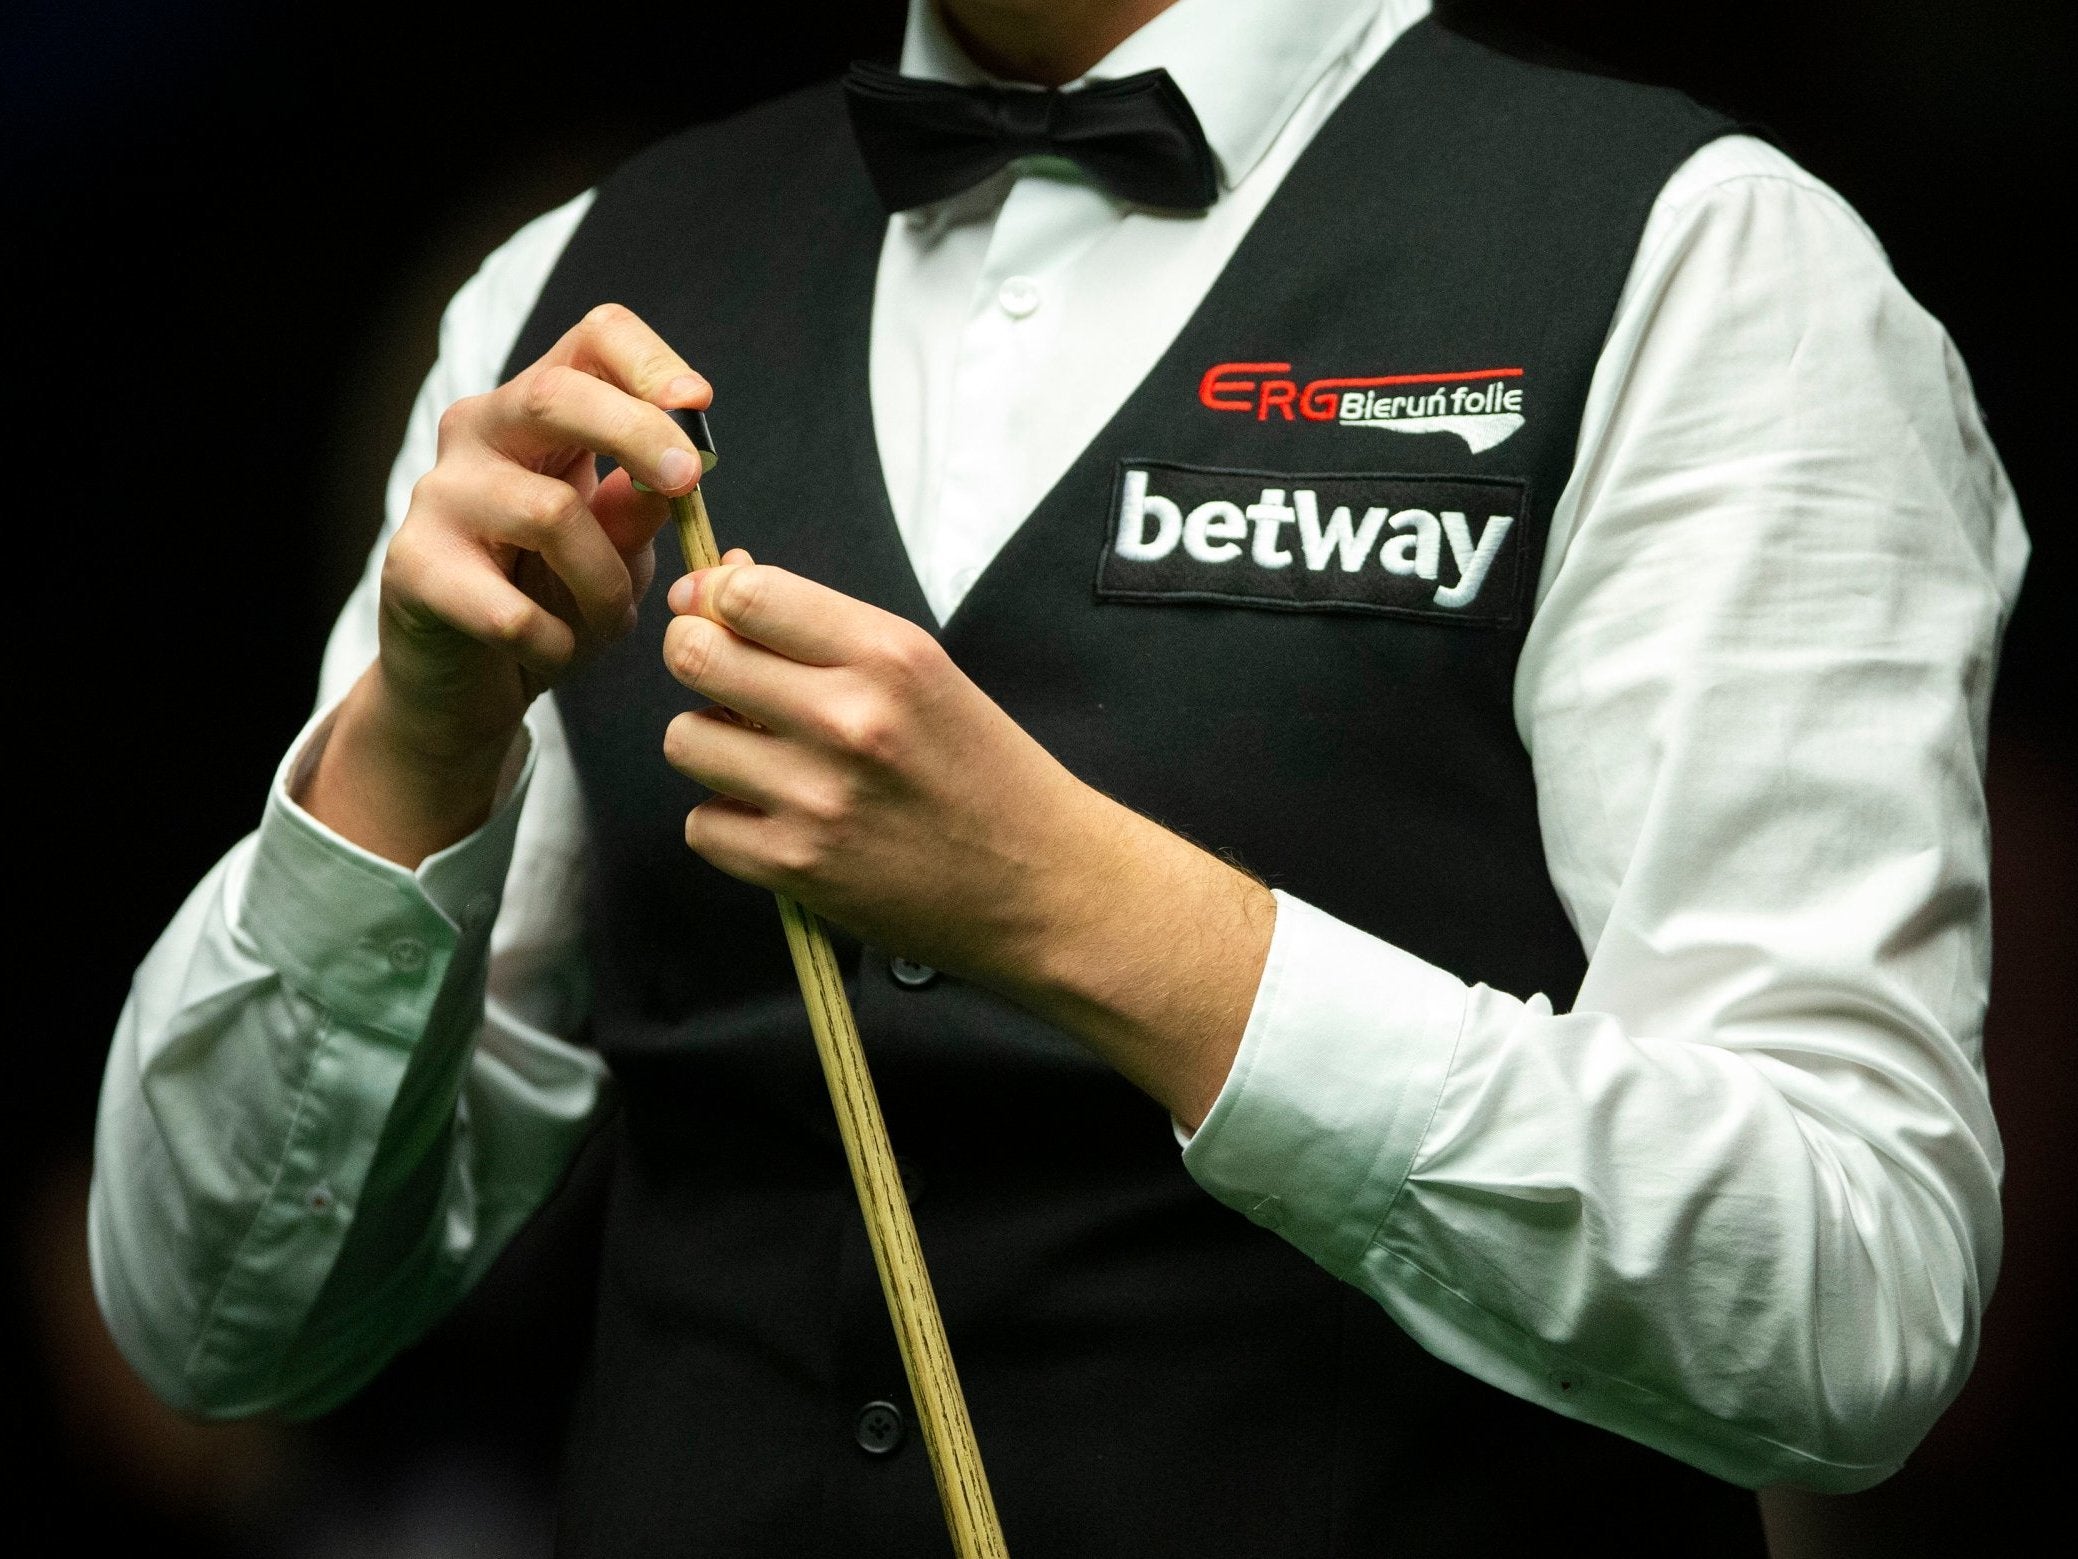 Yu Delu and Cao Yupeng have been banned from snooker after being found guilty of match-fixing